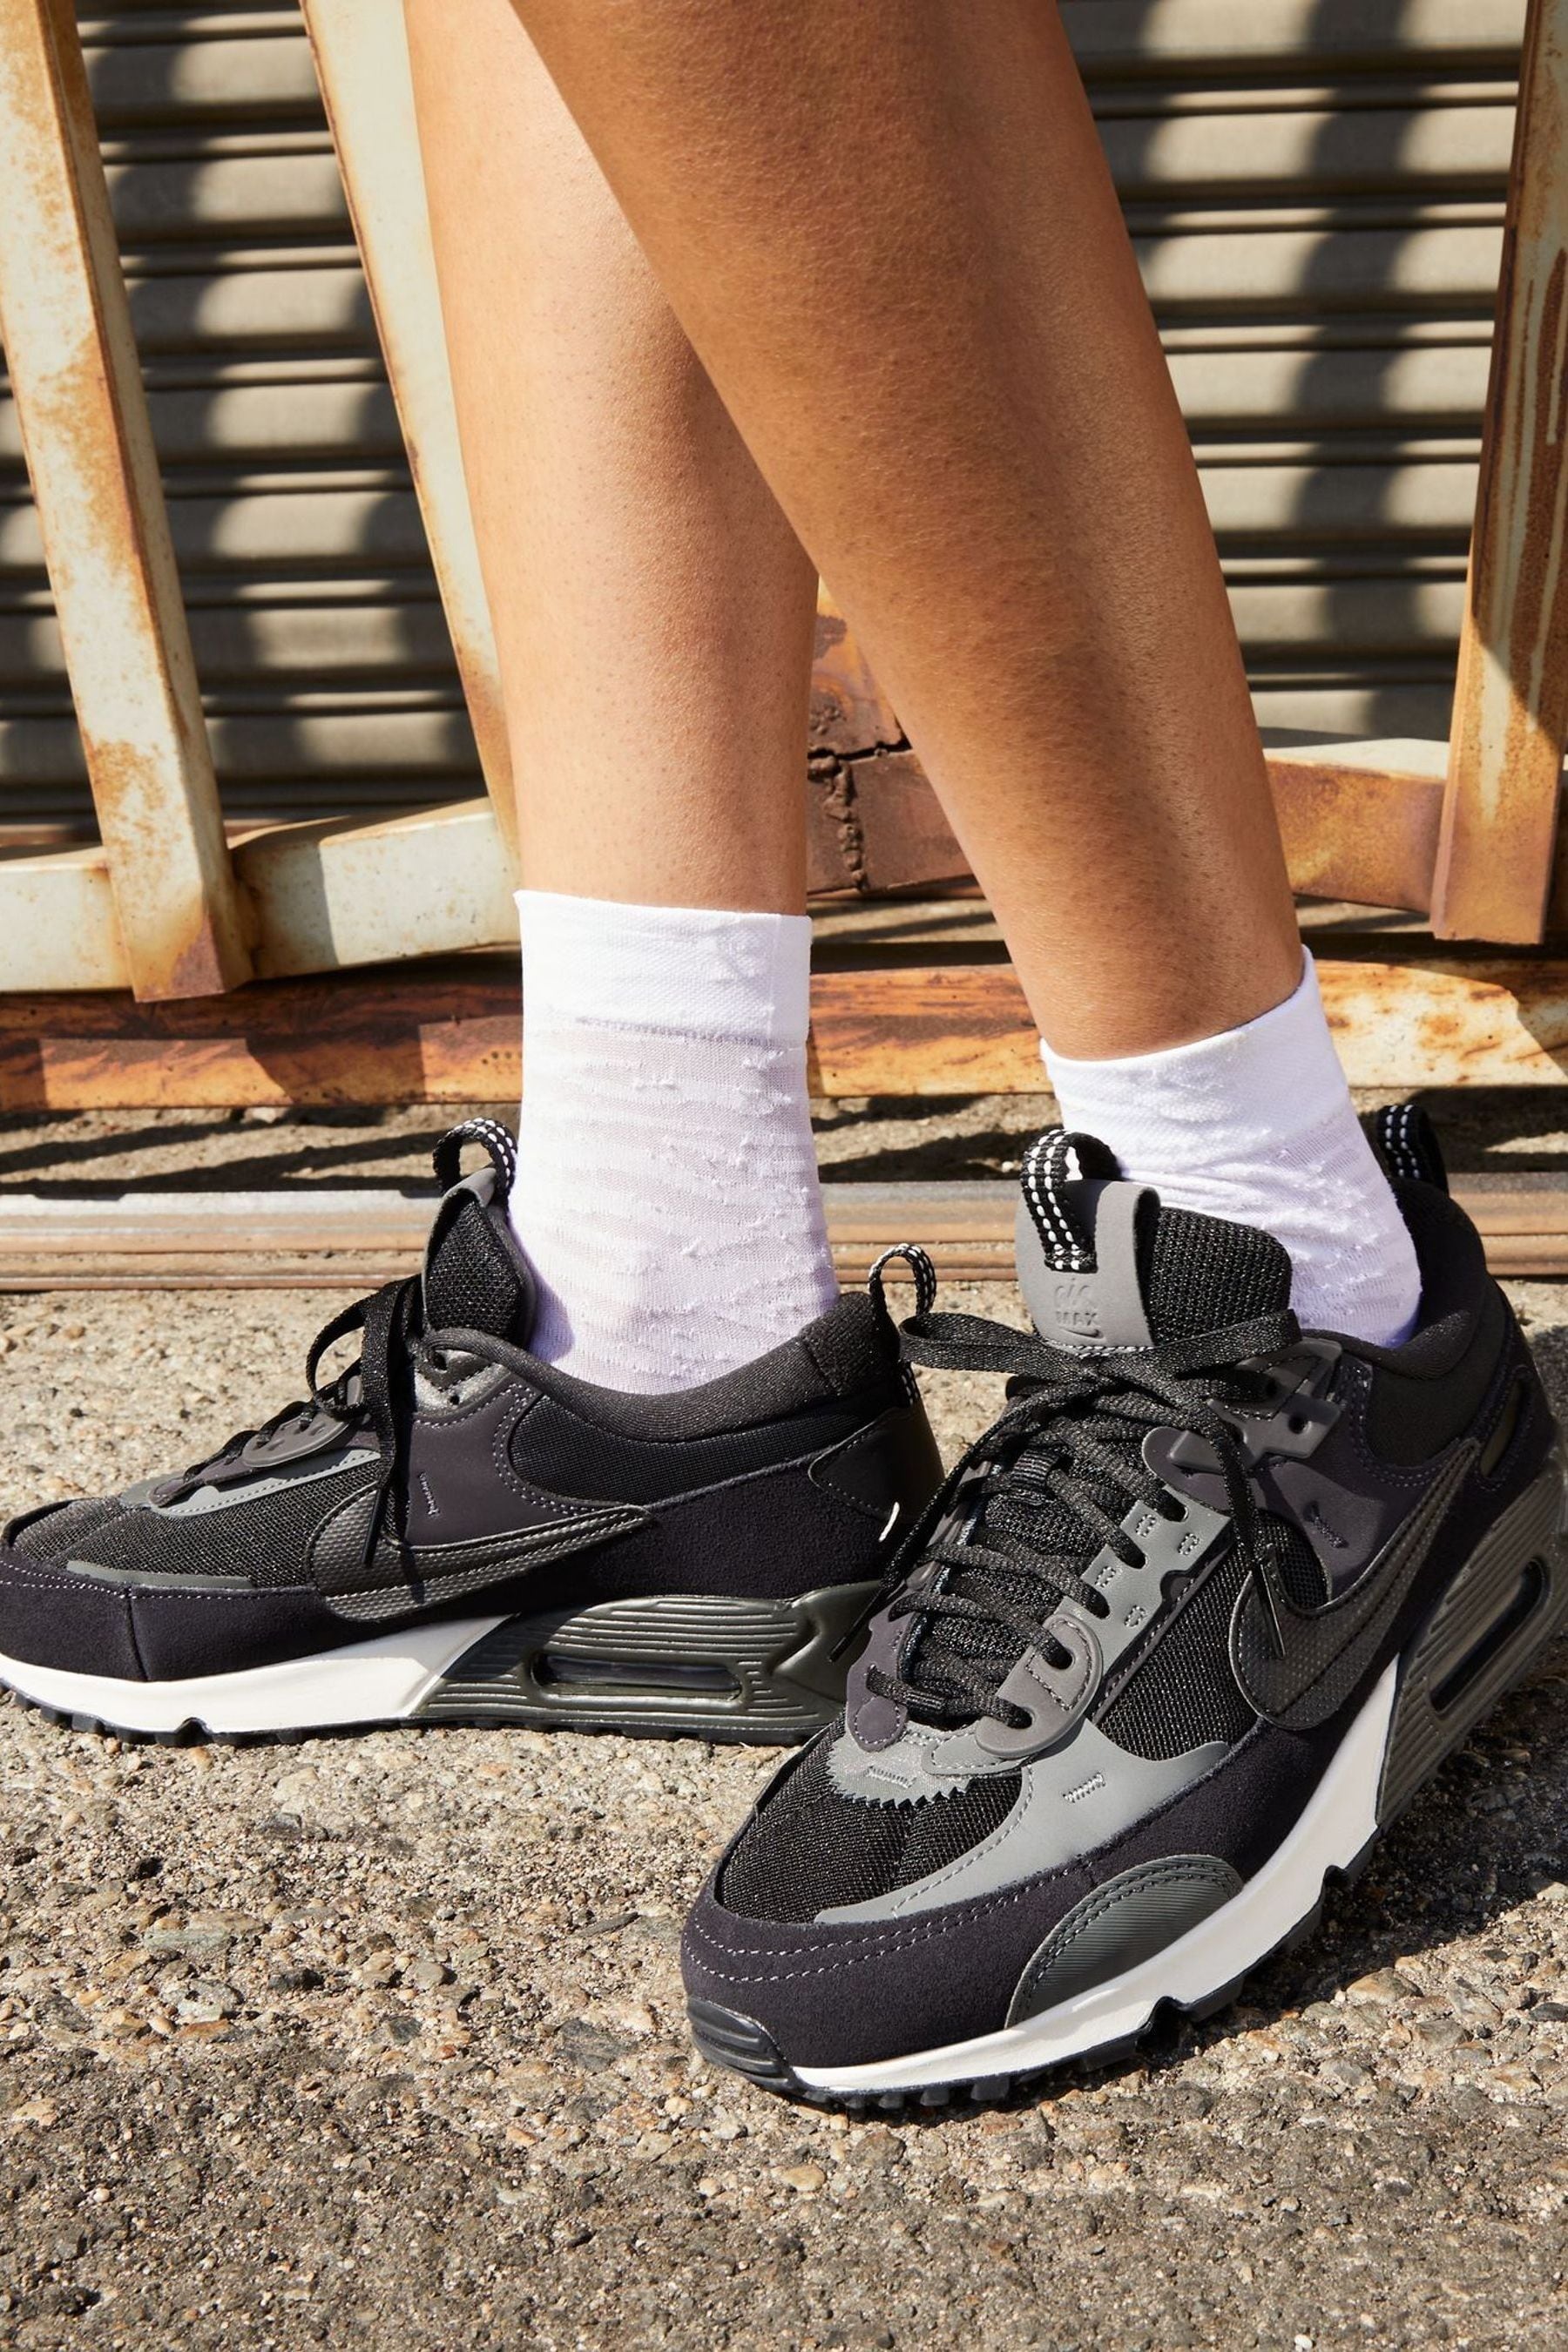 Buy Nike Black Air Max 90 Futura Trainers from the Next UK online shop